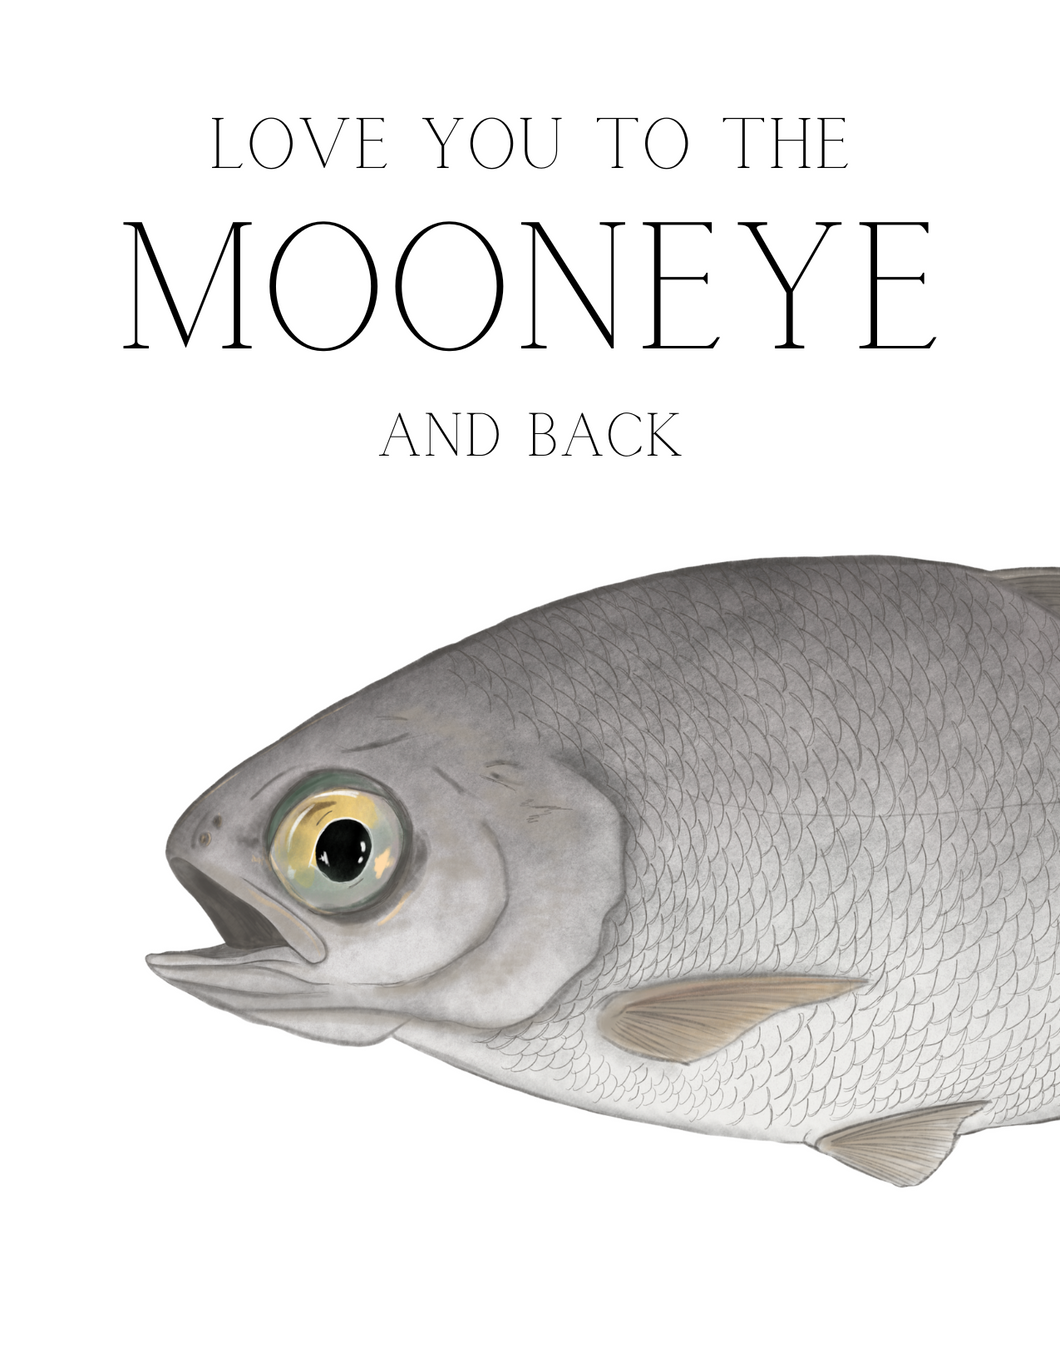 To the Mooneye and Back - Anniversary Card